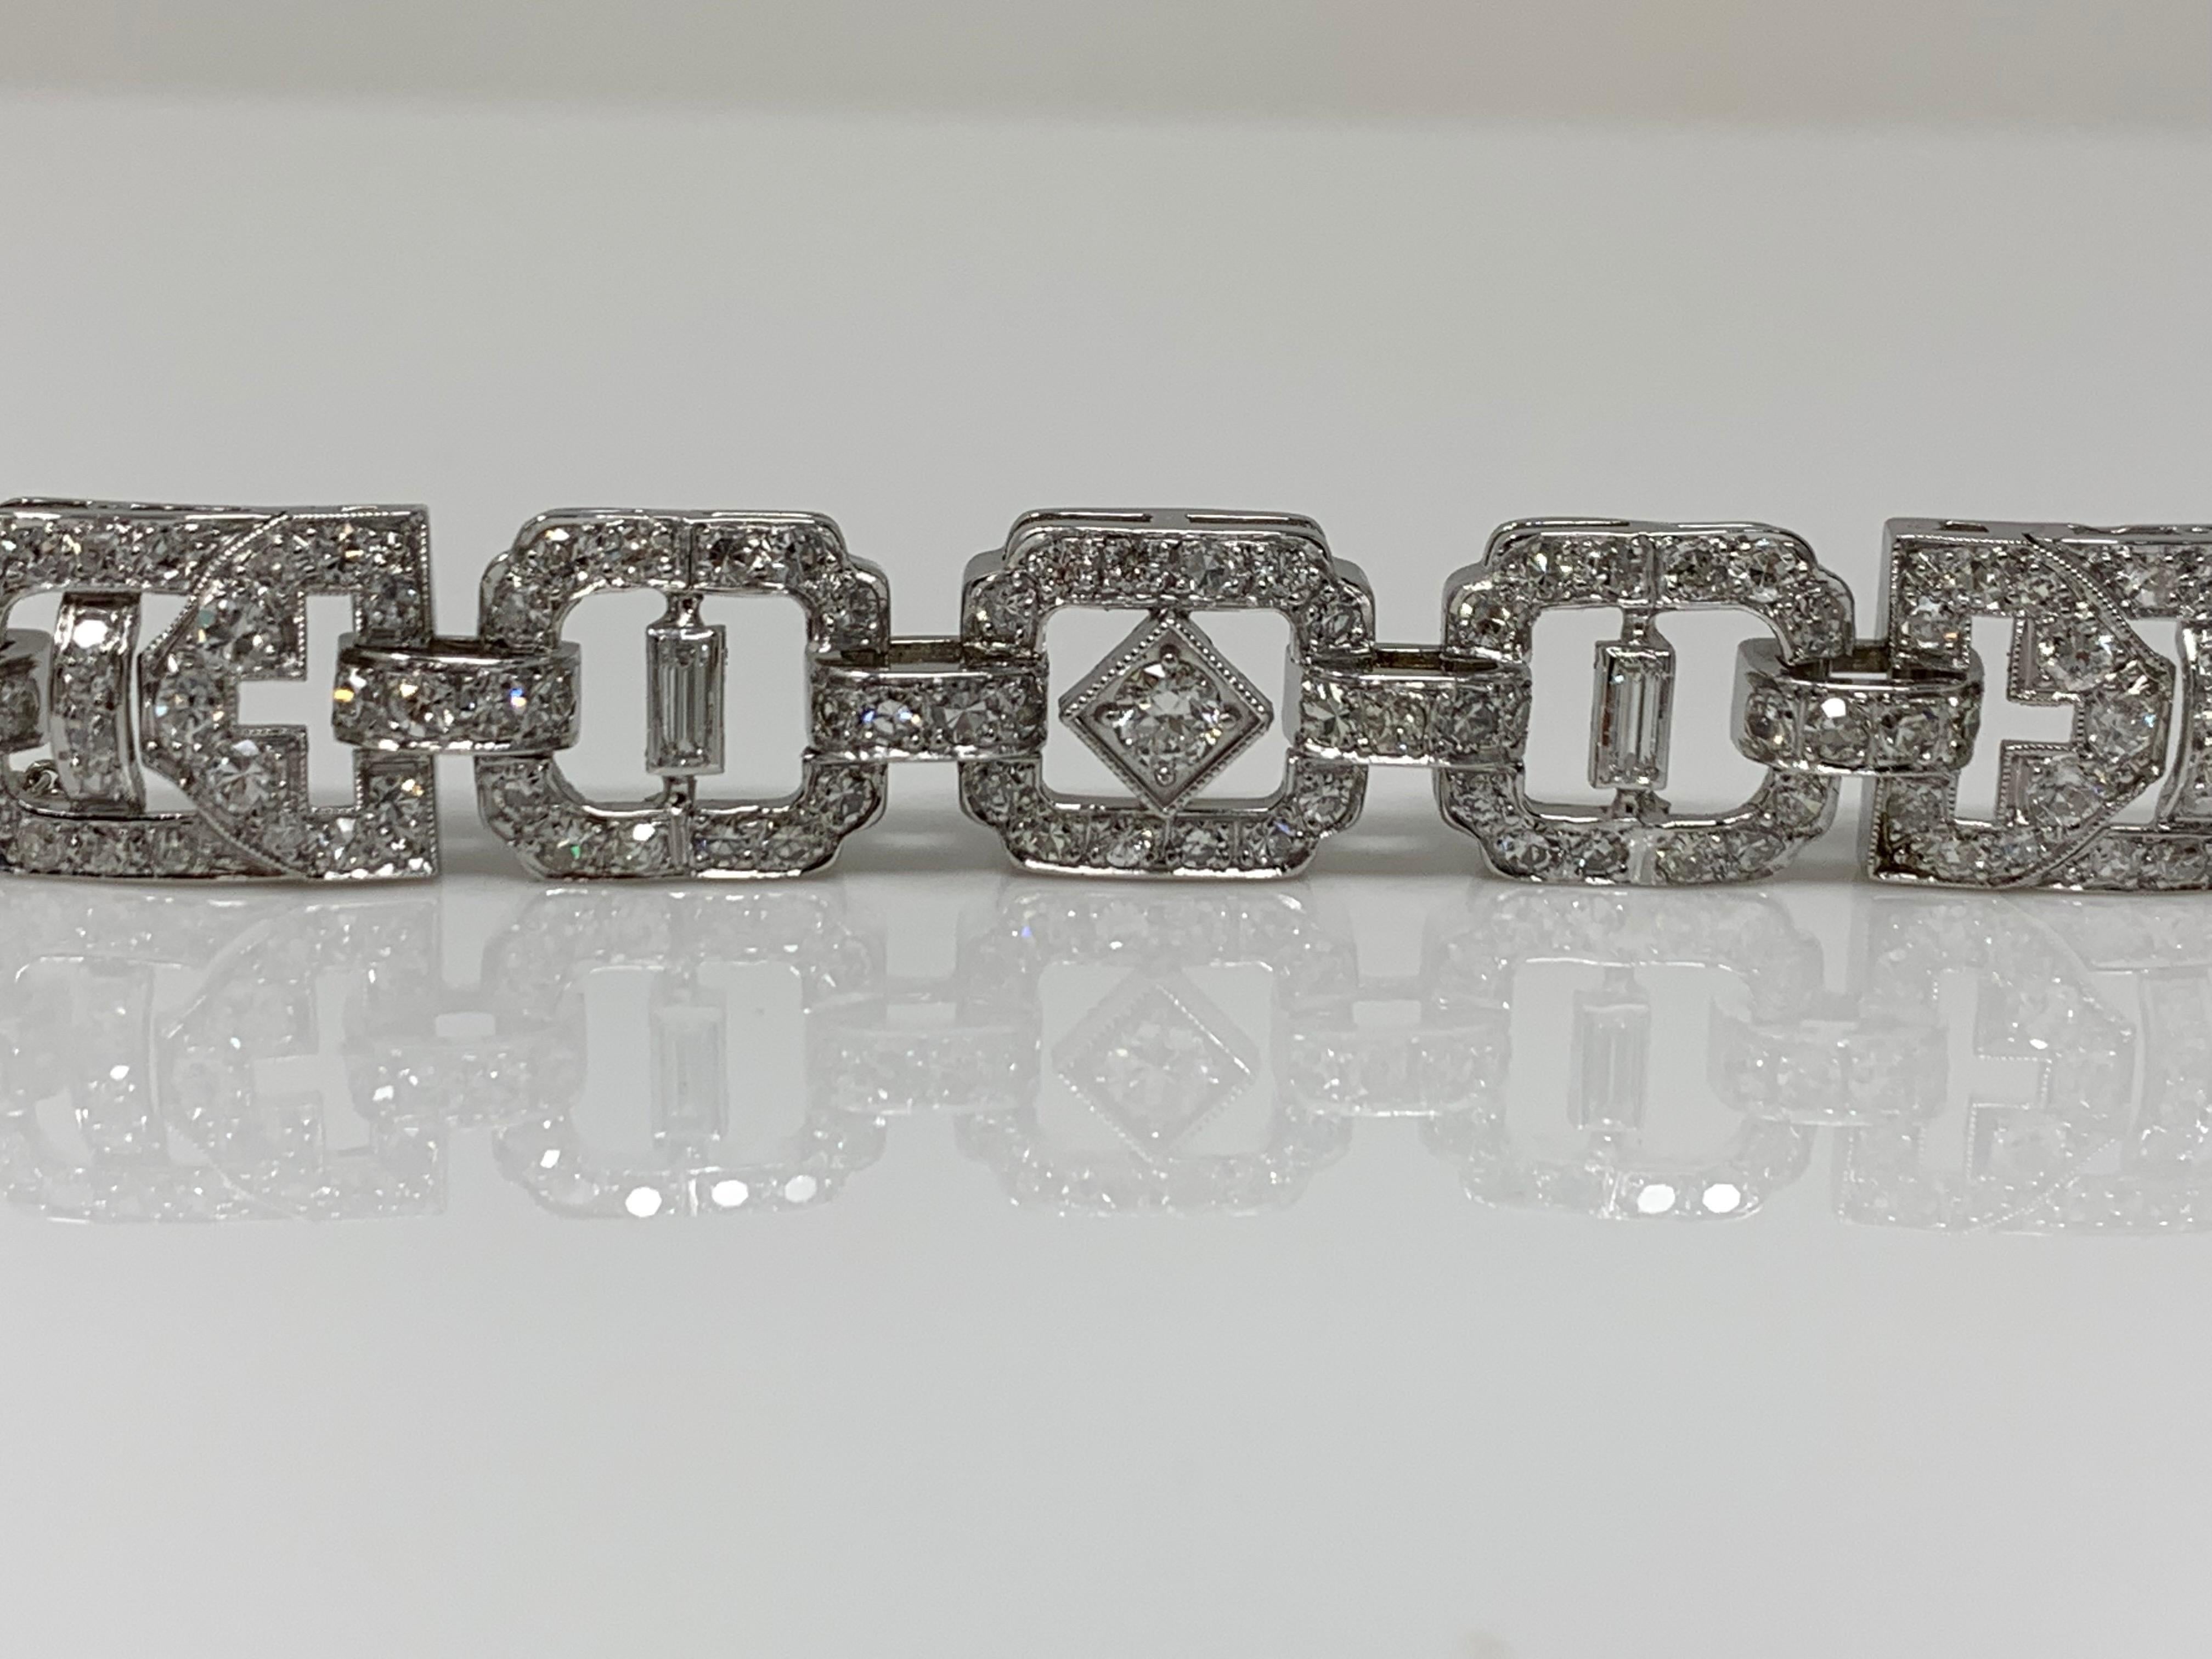 1930 Antique 9 Carat White Diamond Bracelet in Platinum In Excellent Condition For Sale In New York, NY